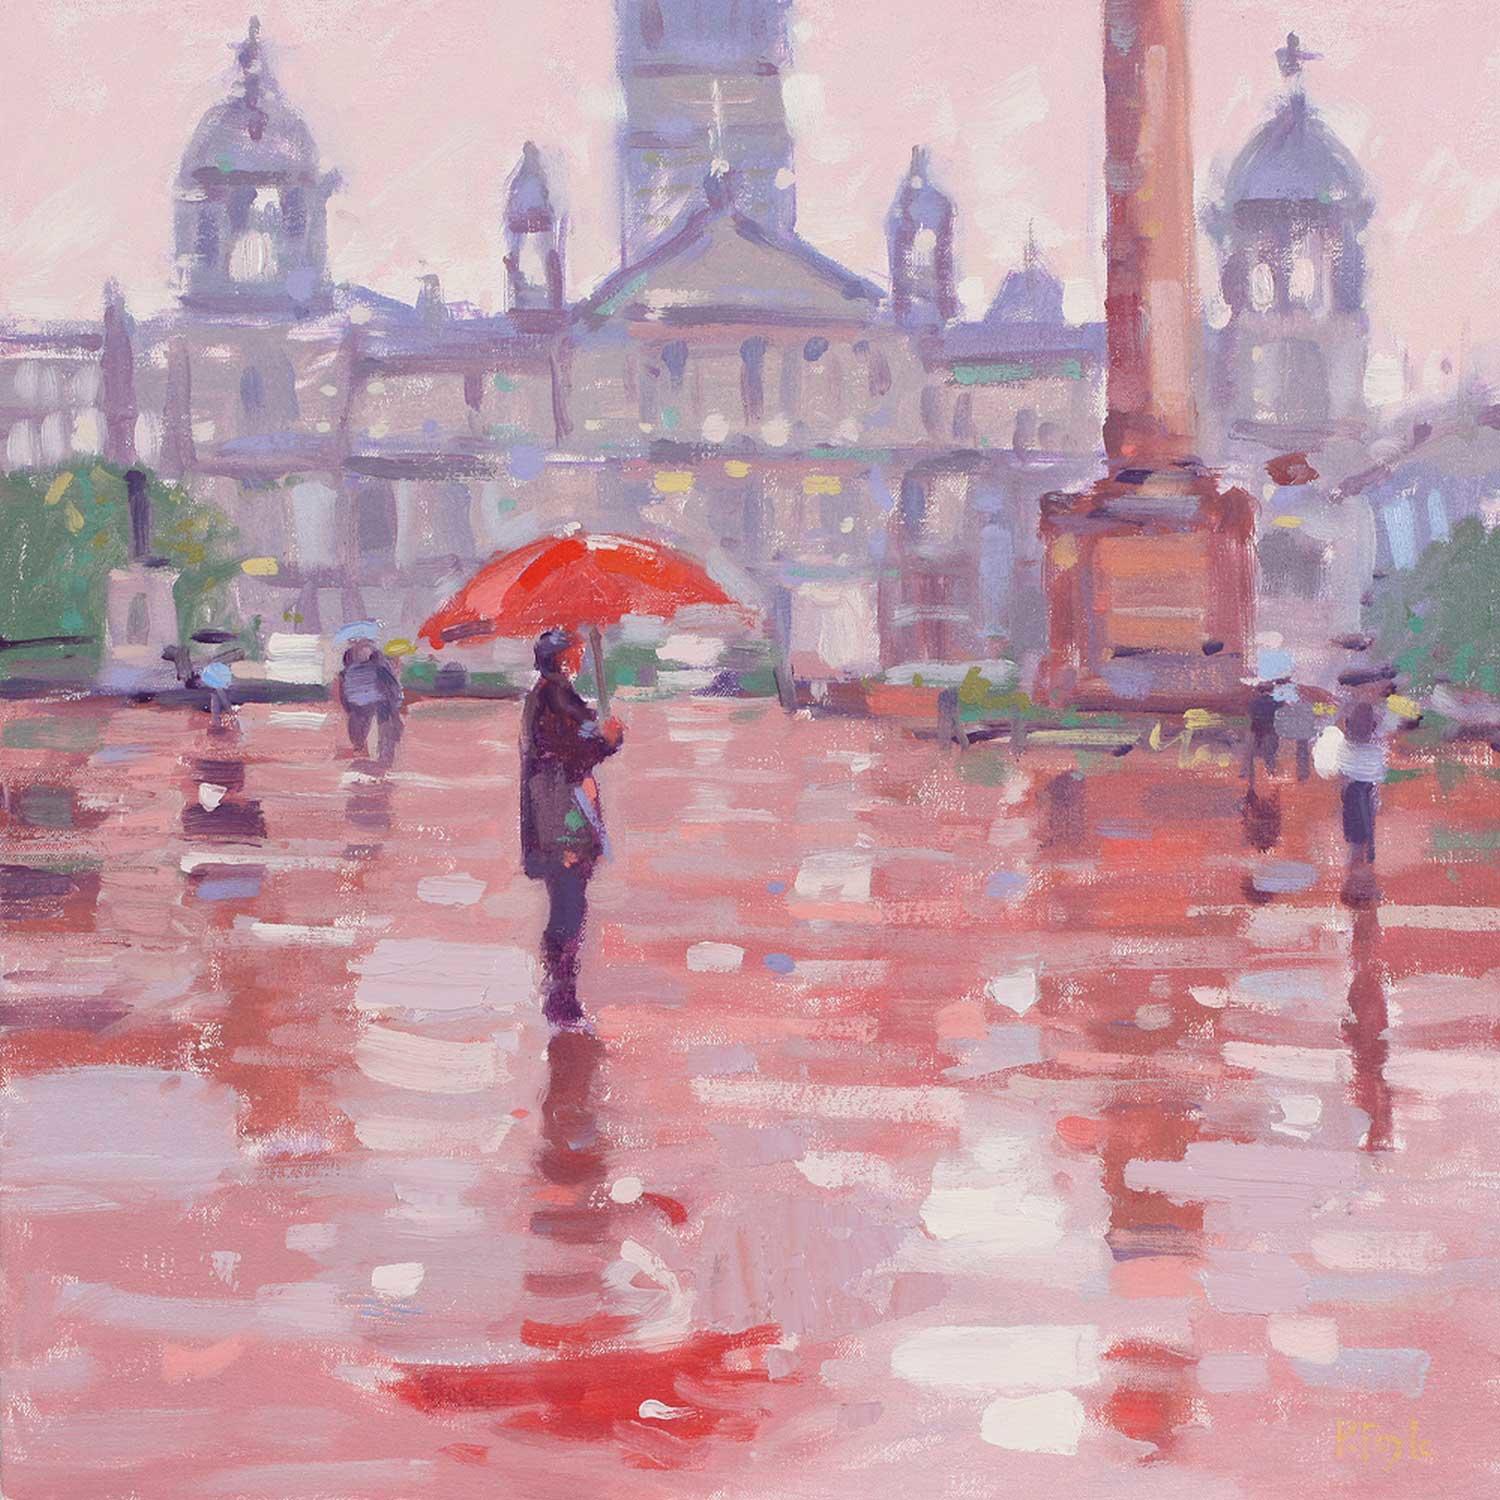 In George Square by Peter Foyle